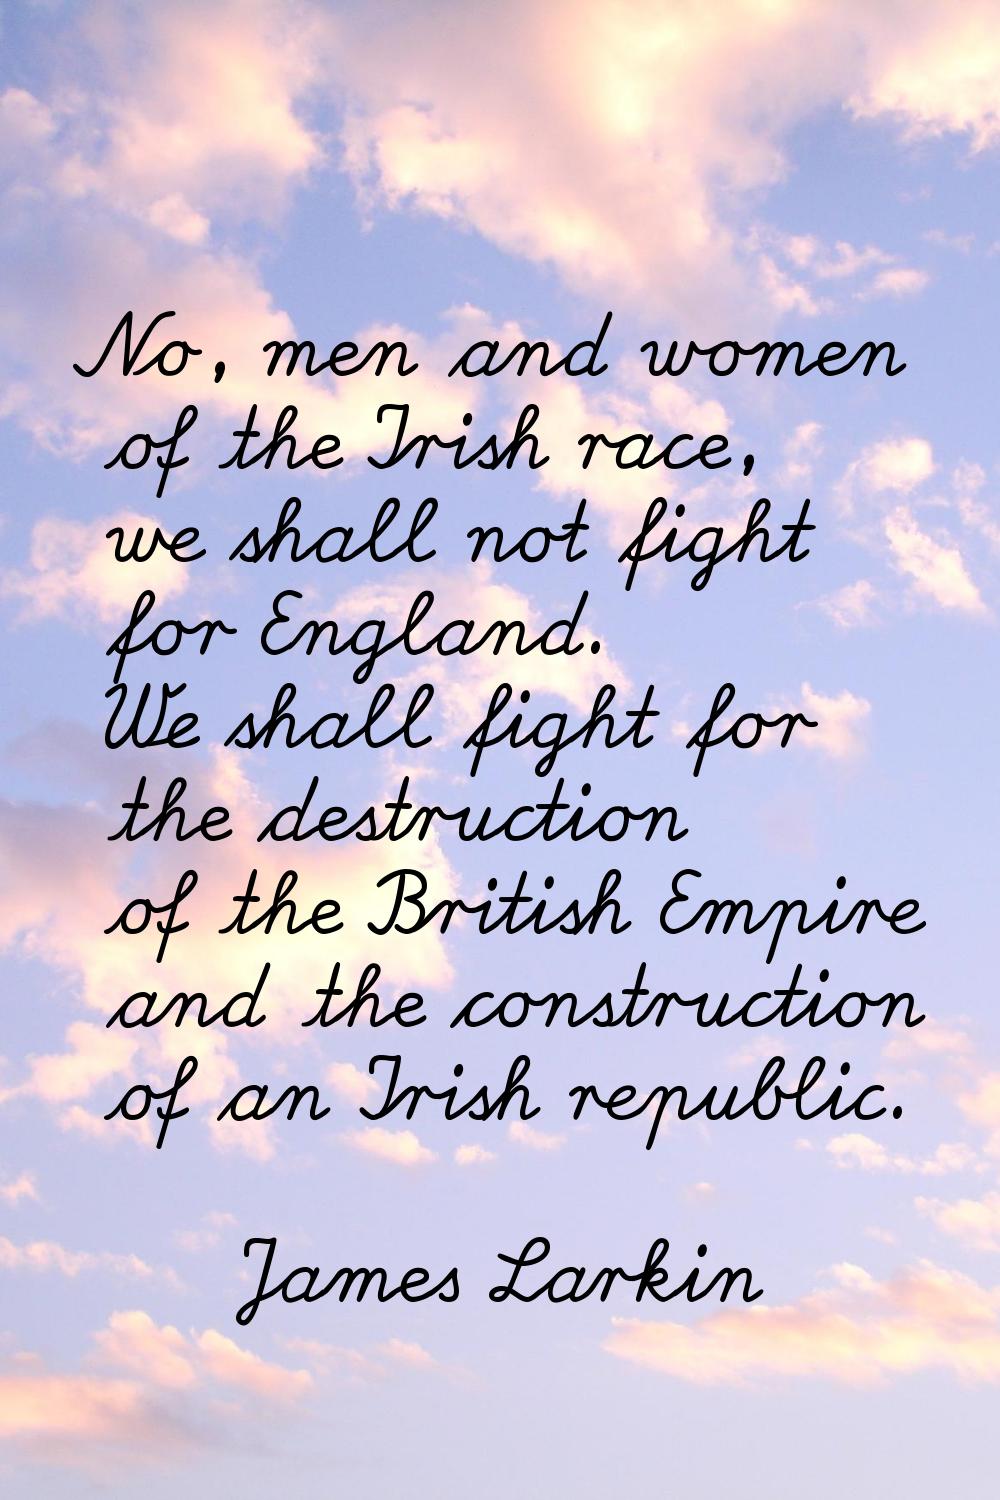 No, men and women of the Irish race, we shall not fight for England. We shall fight for the destruc